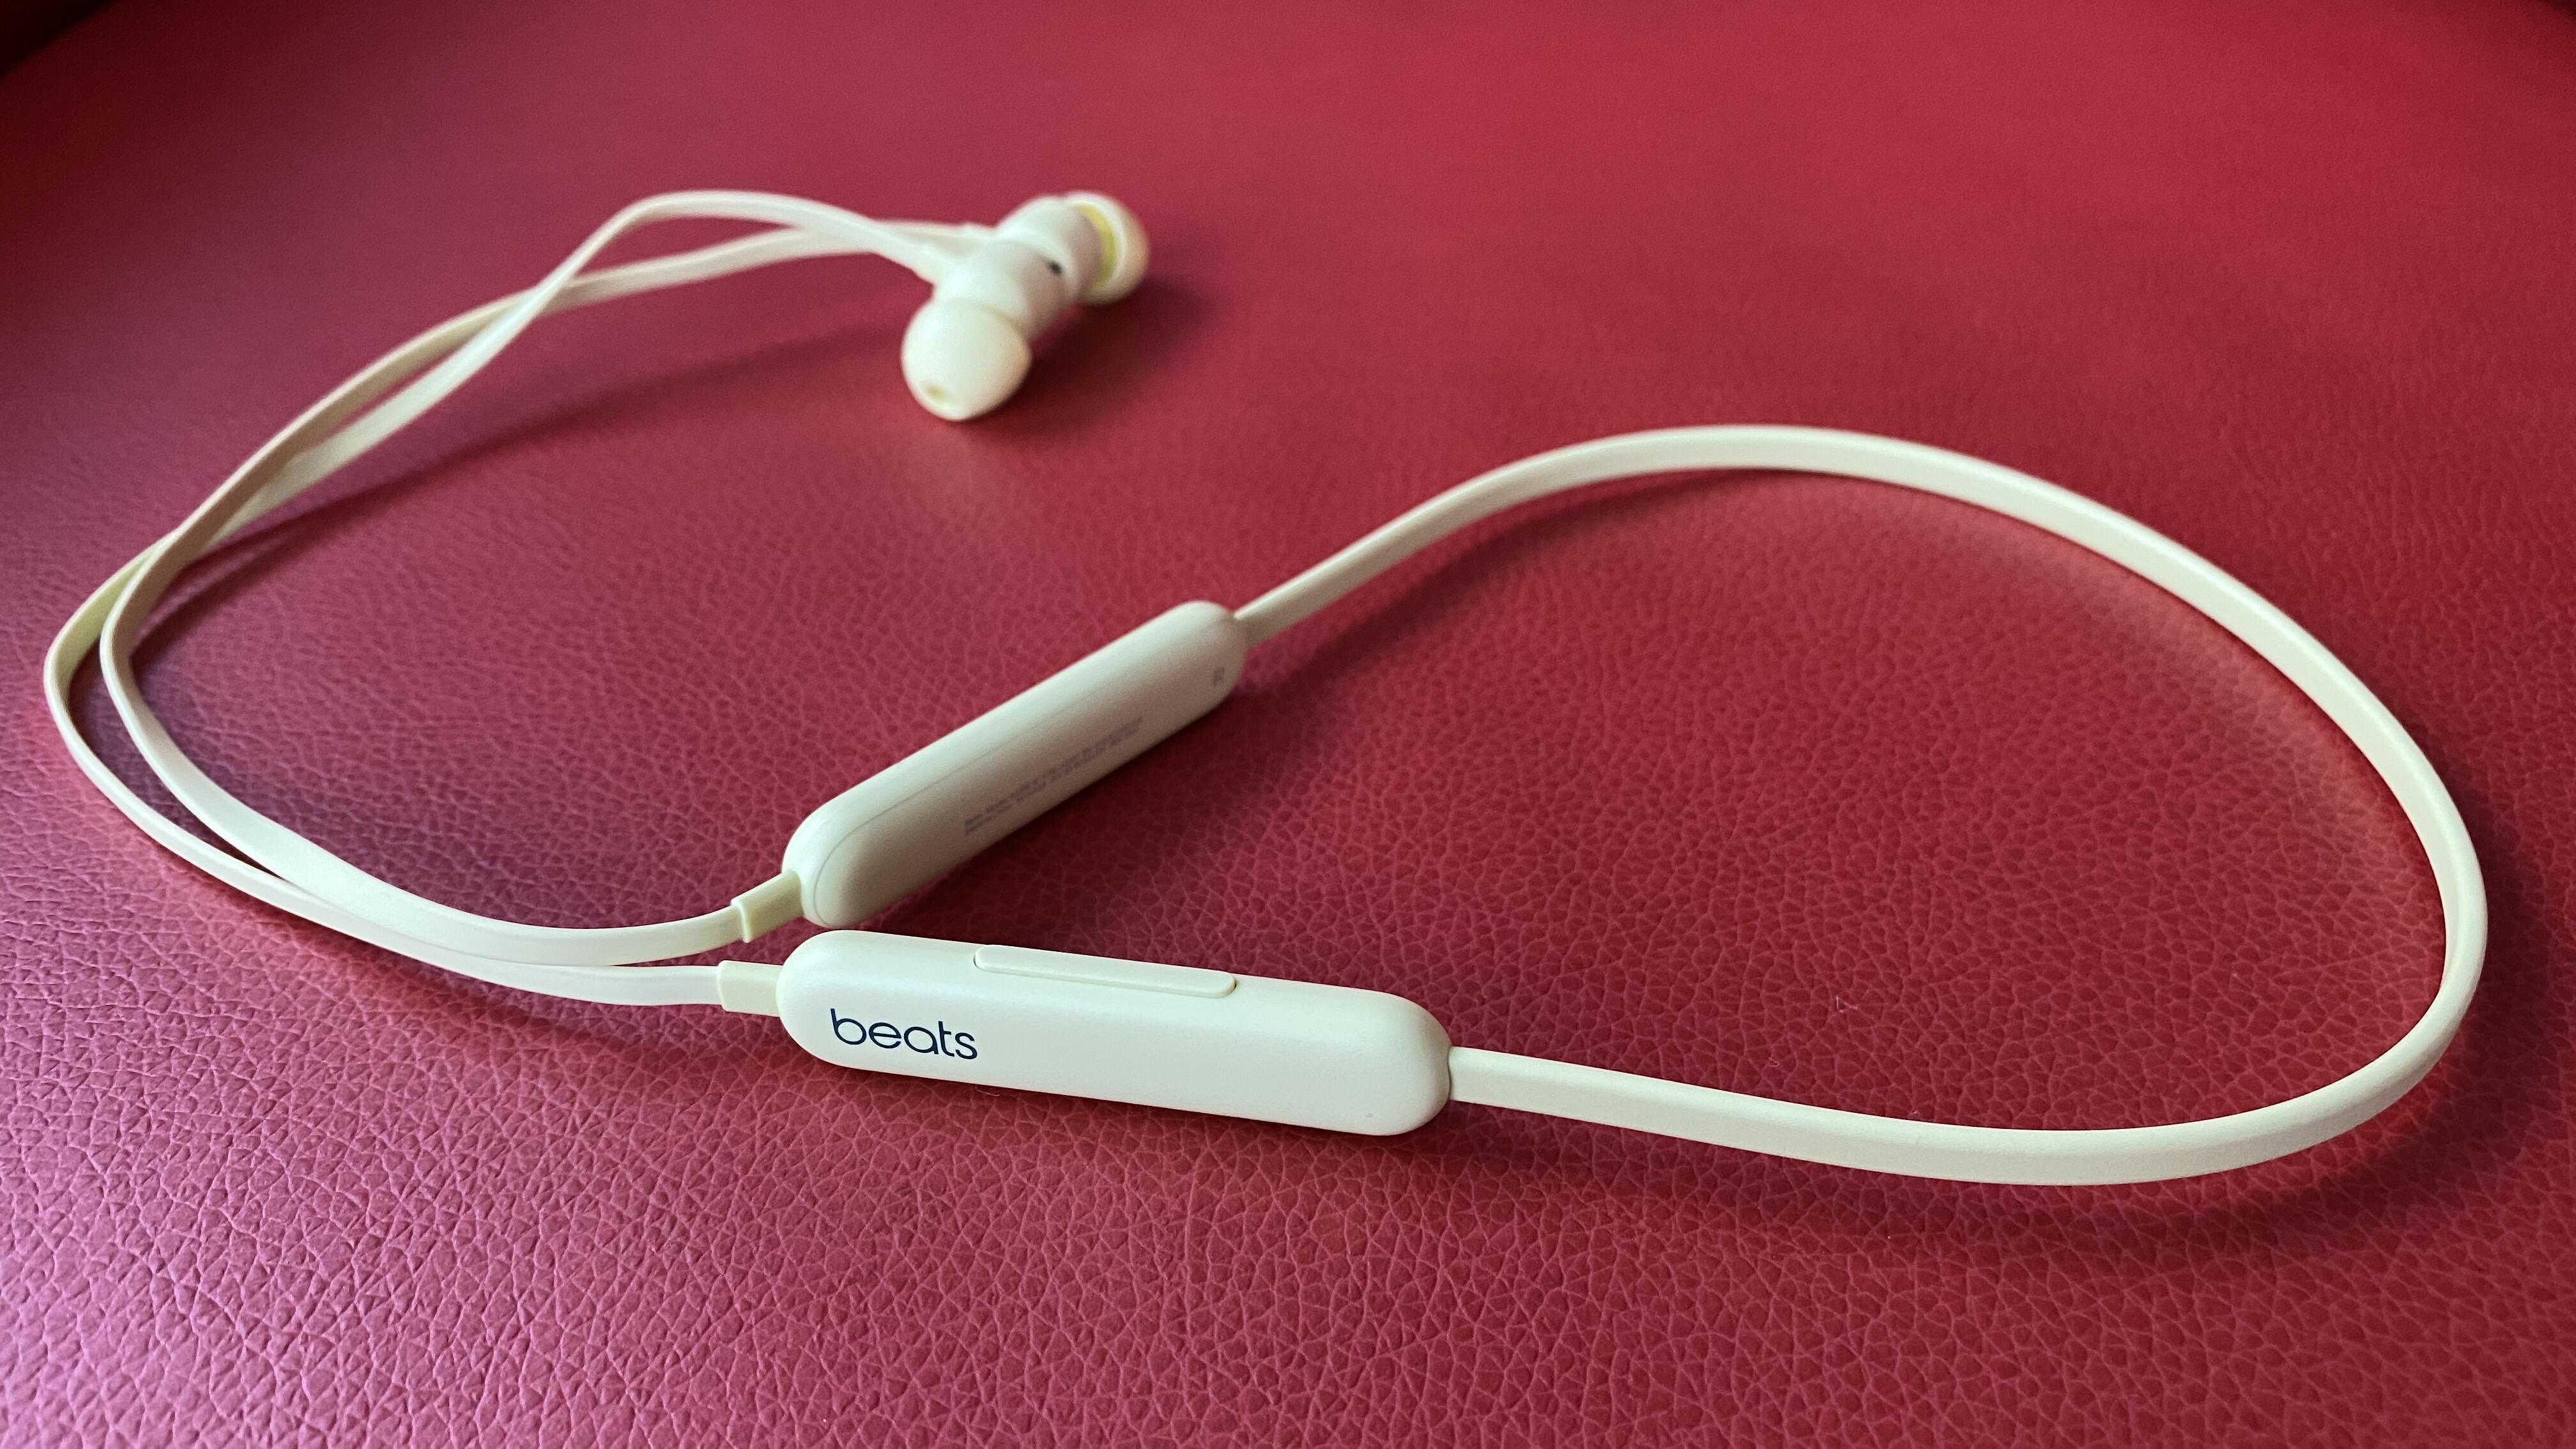 is beats headphones compatible with android